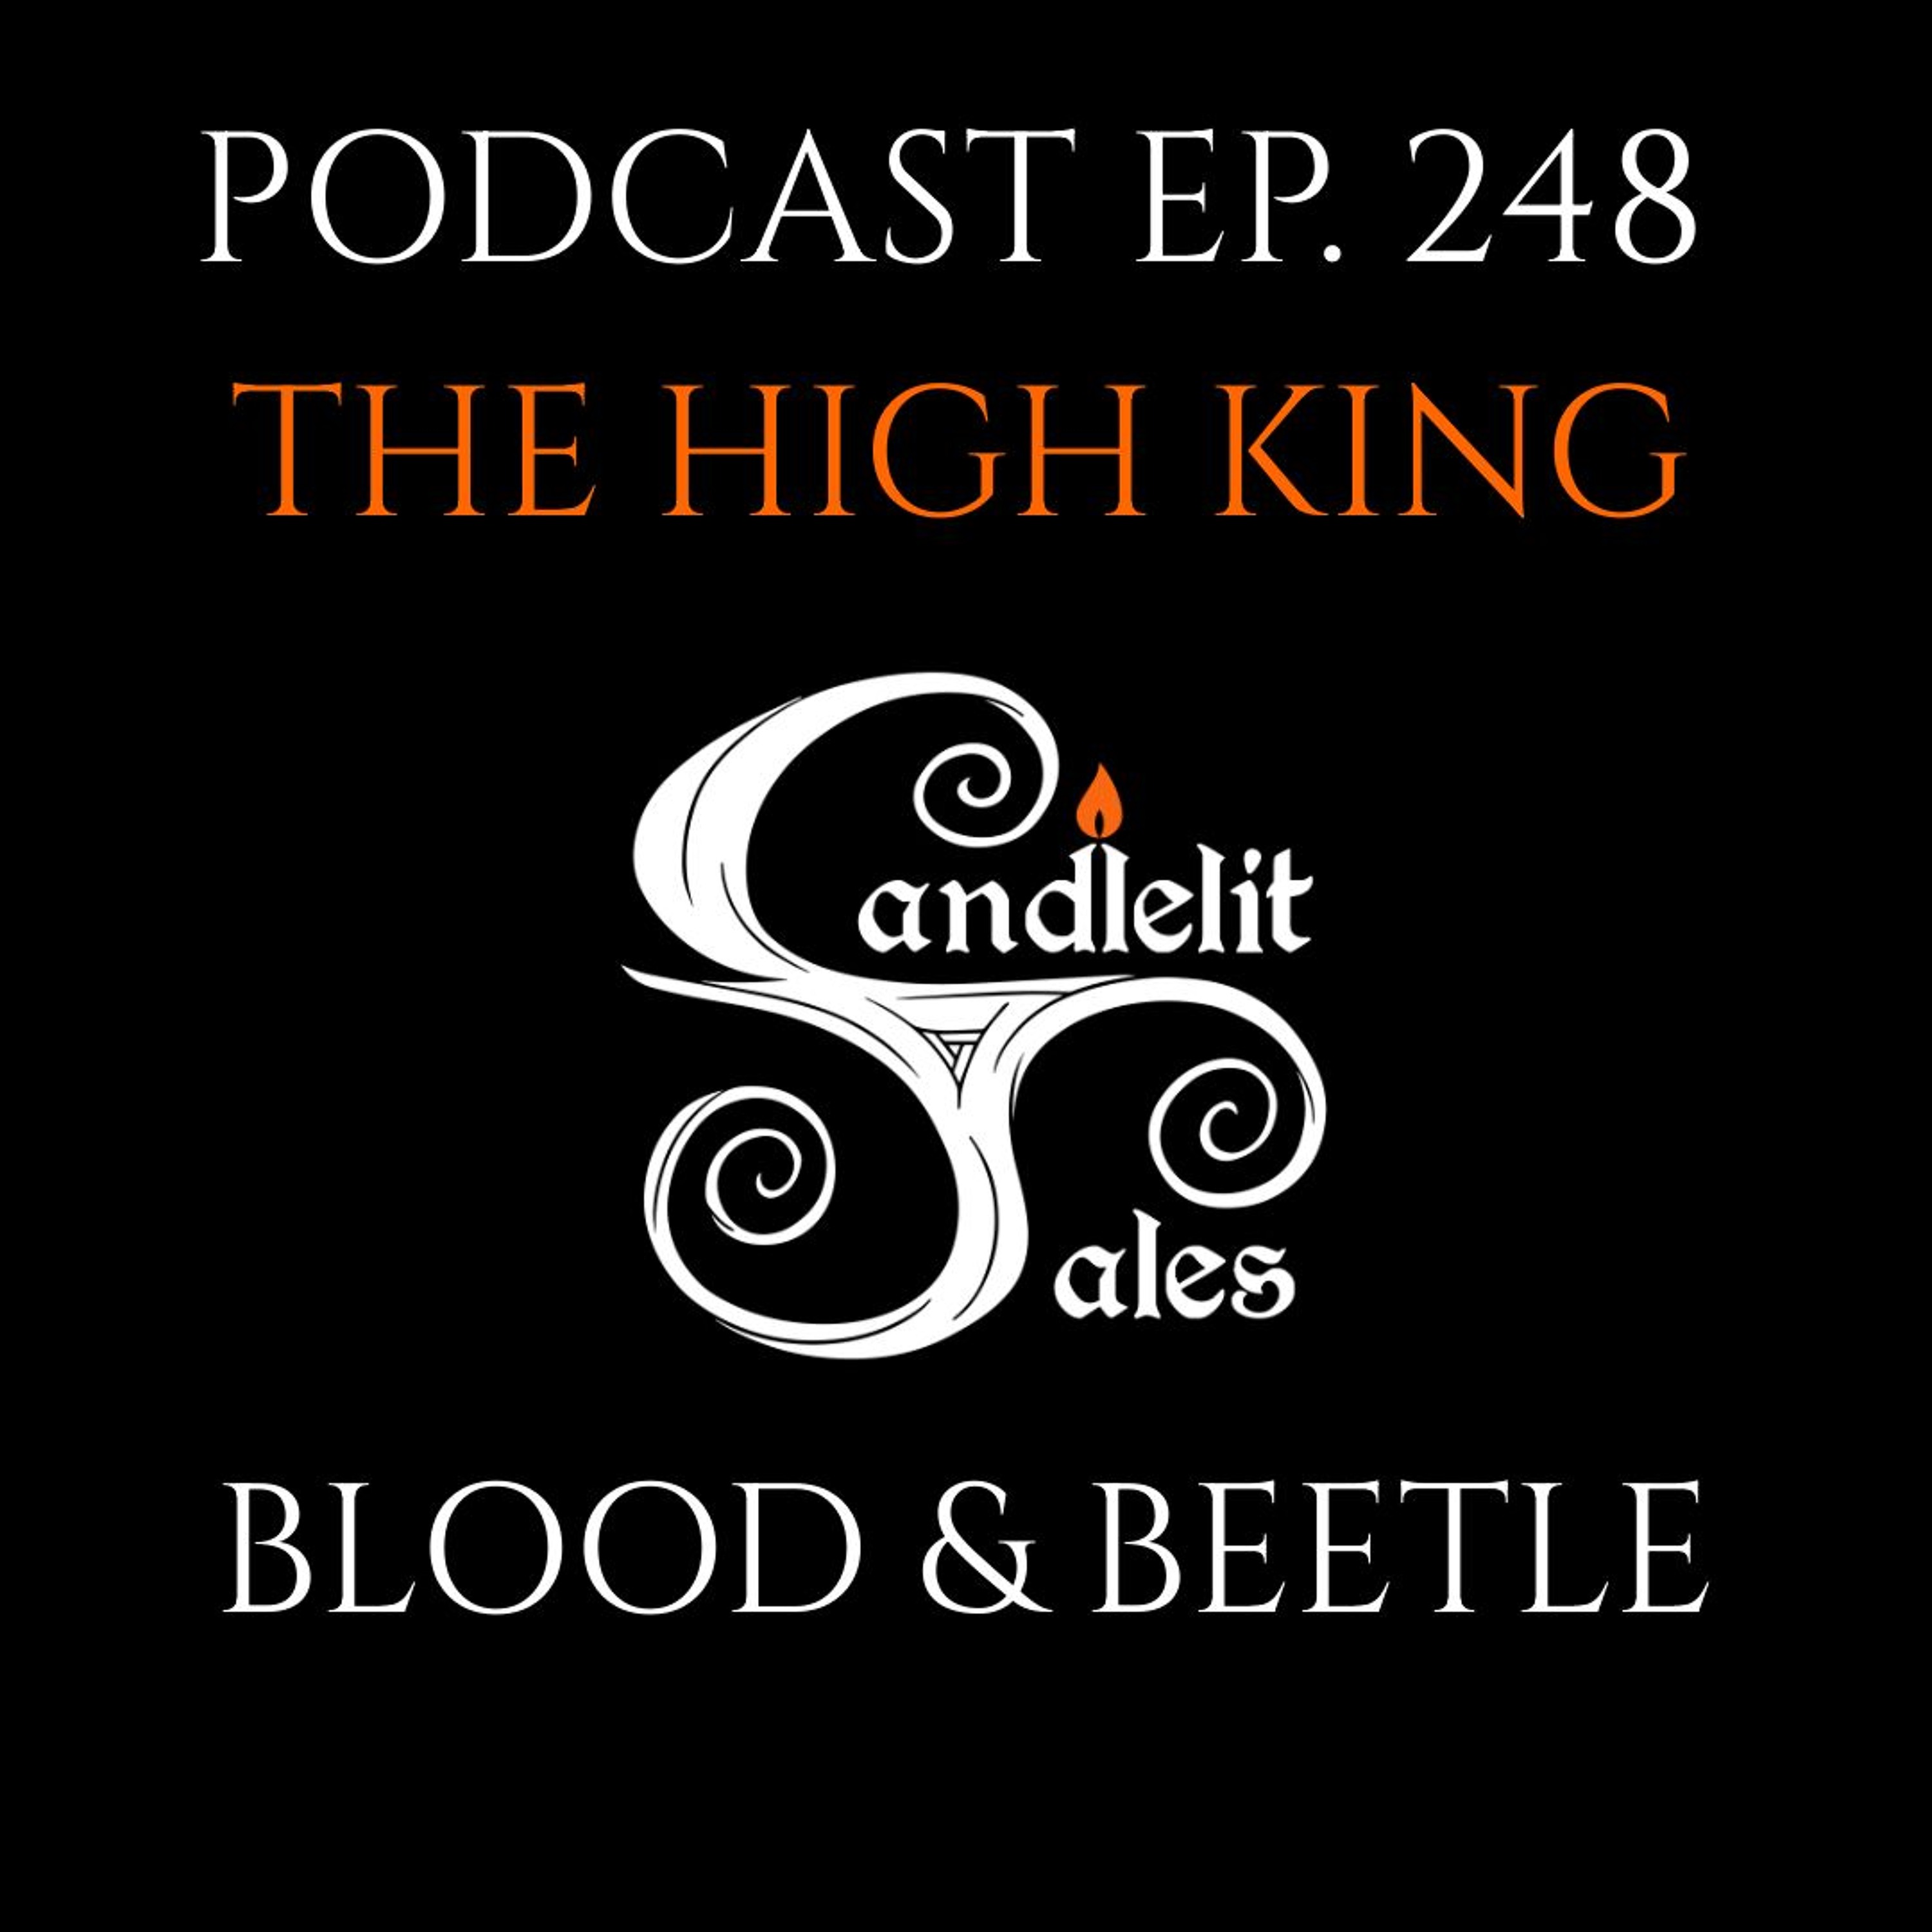 Episode 248 - The High King - Blood & Beetle